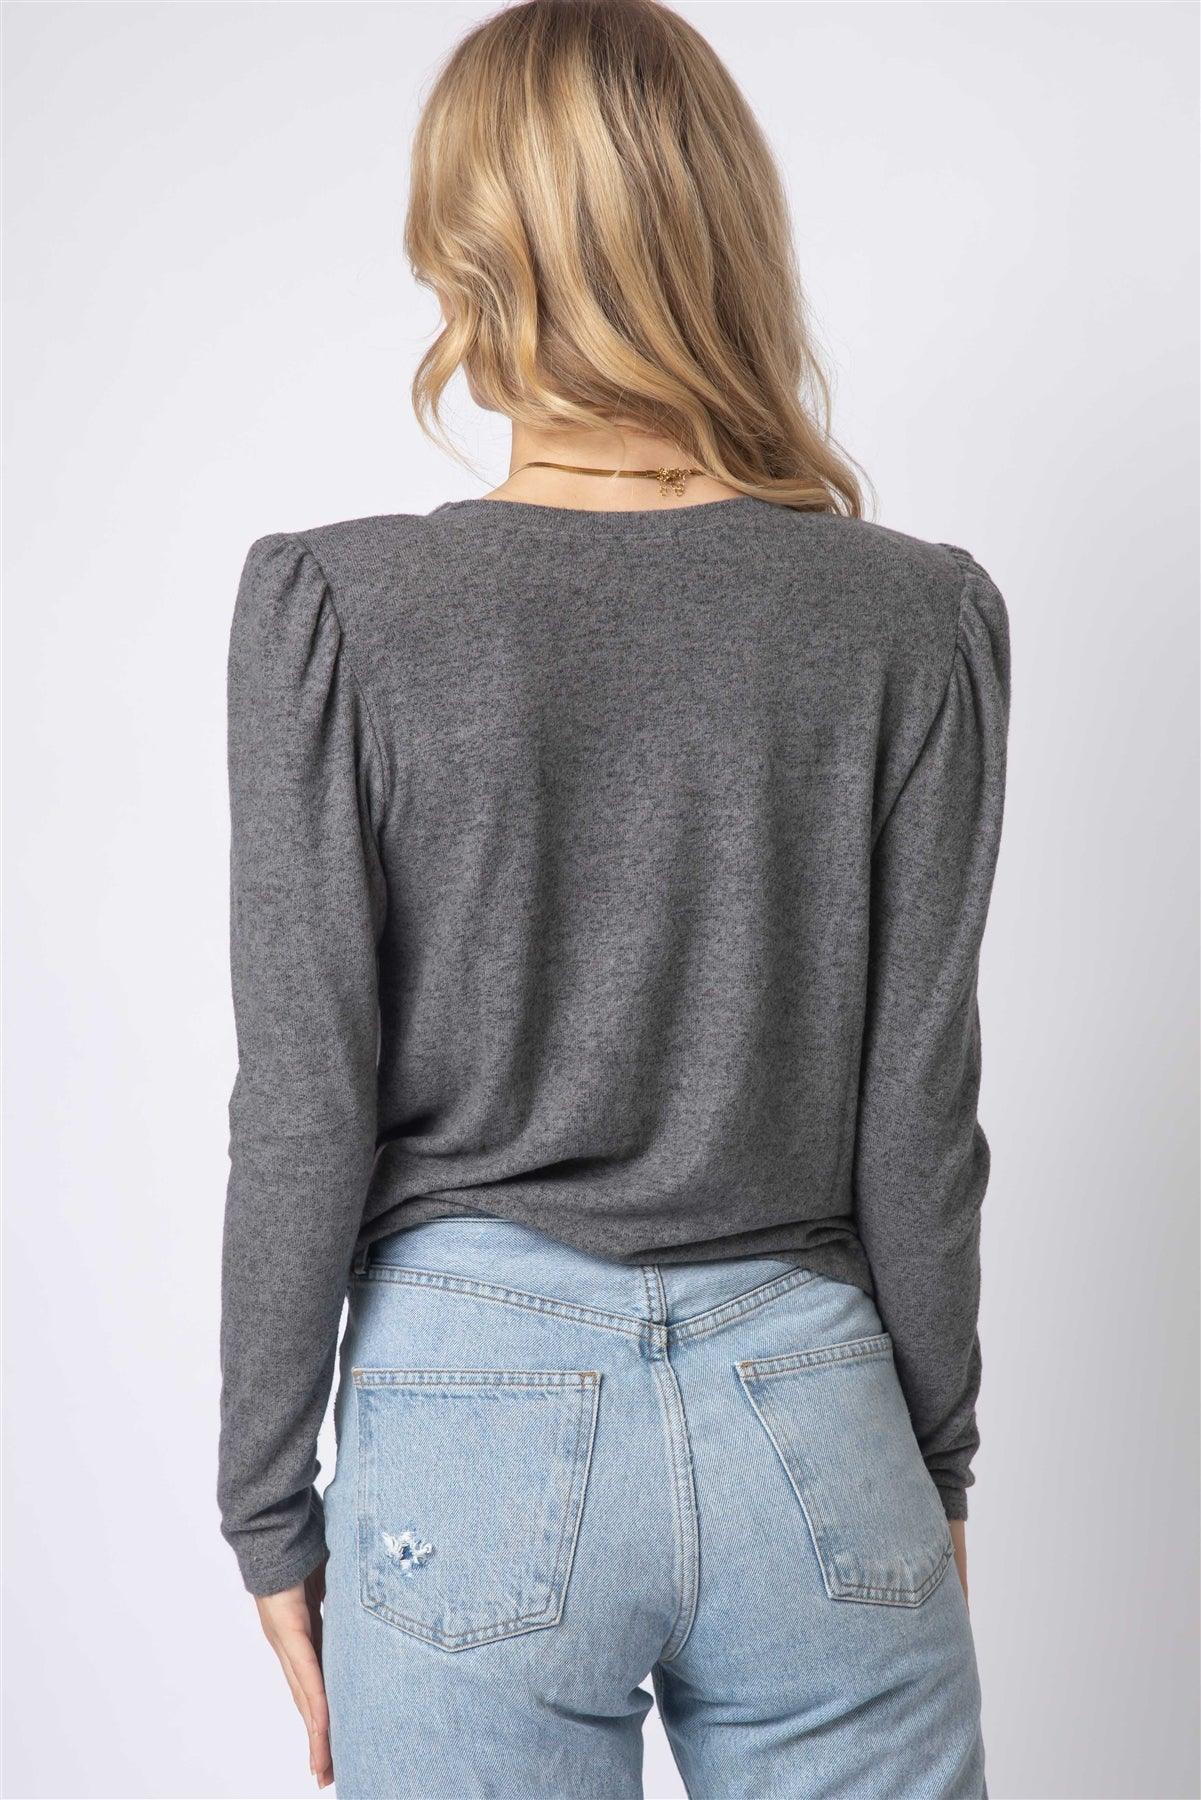 Charcoal Twisted Detail Shoulder Pad Long Sleeve Top /1-1-1